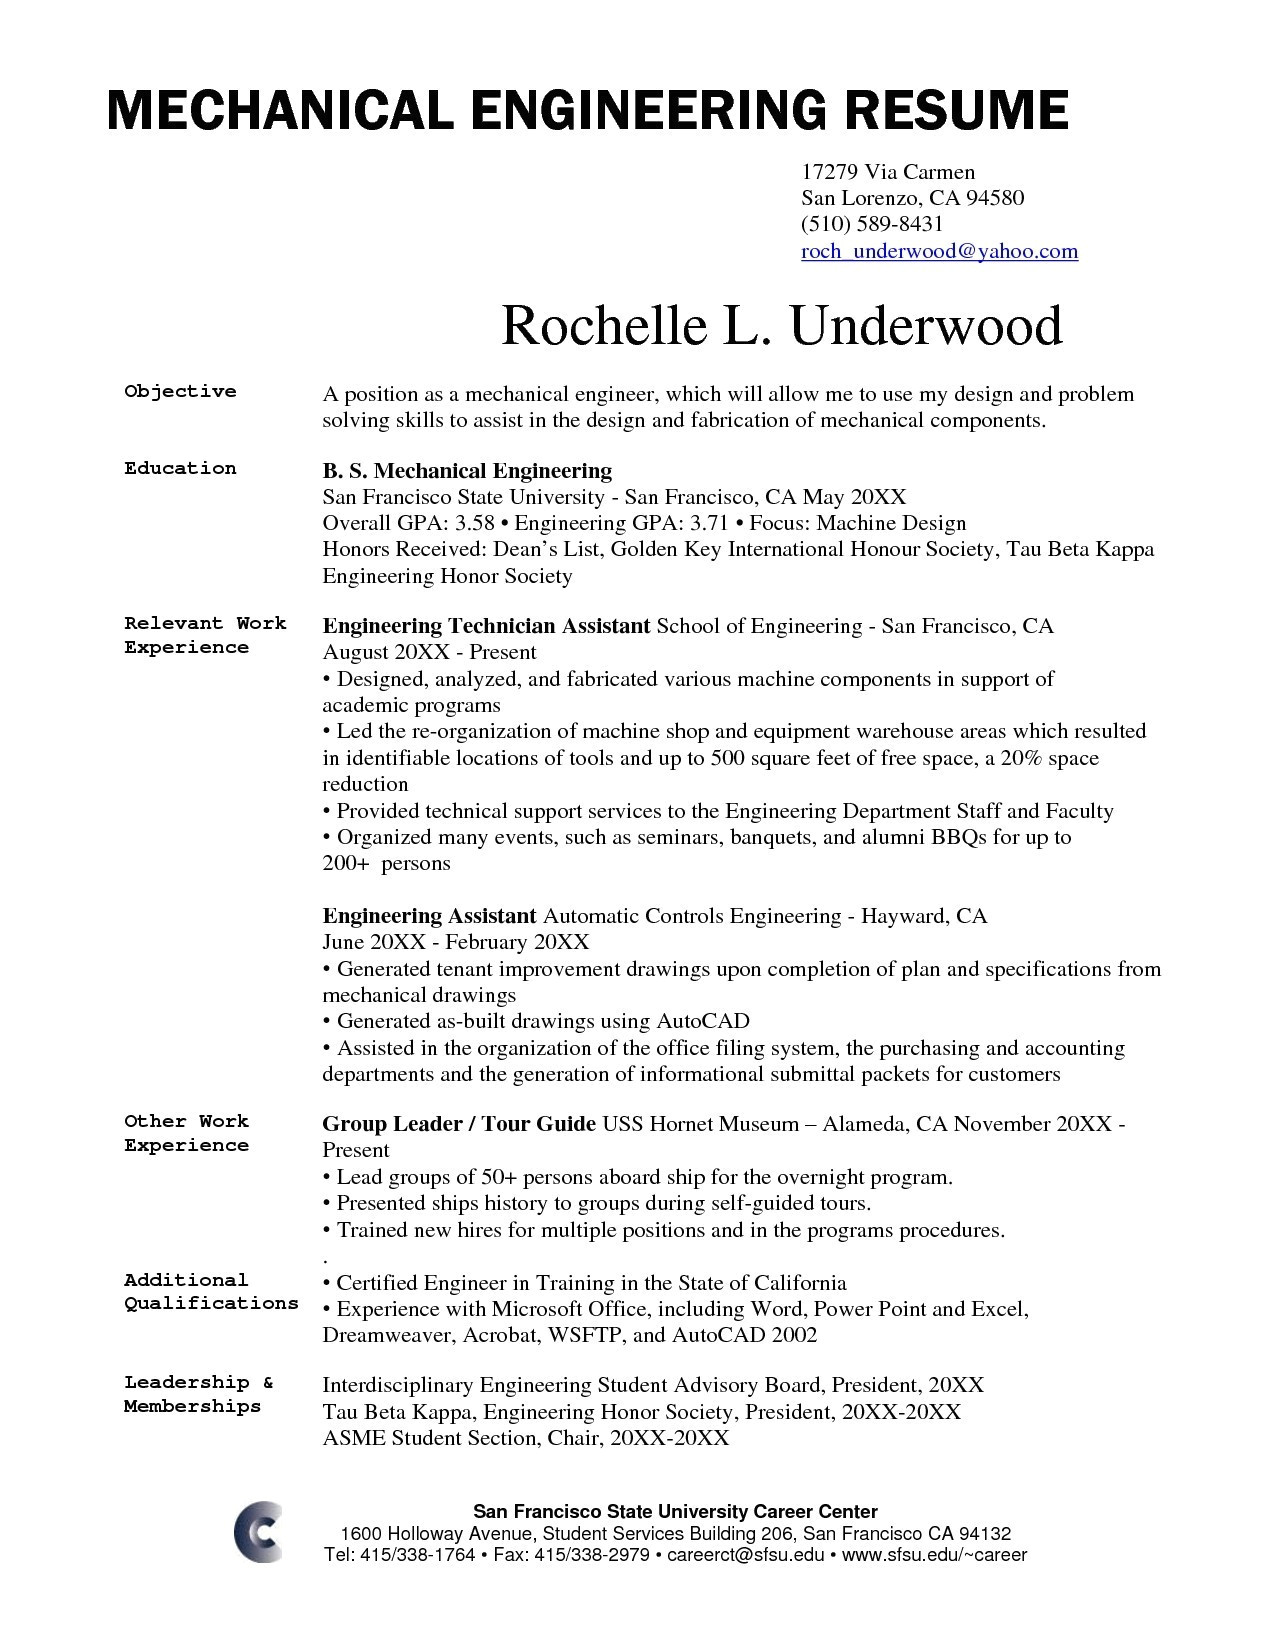 resume resources umich